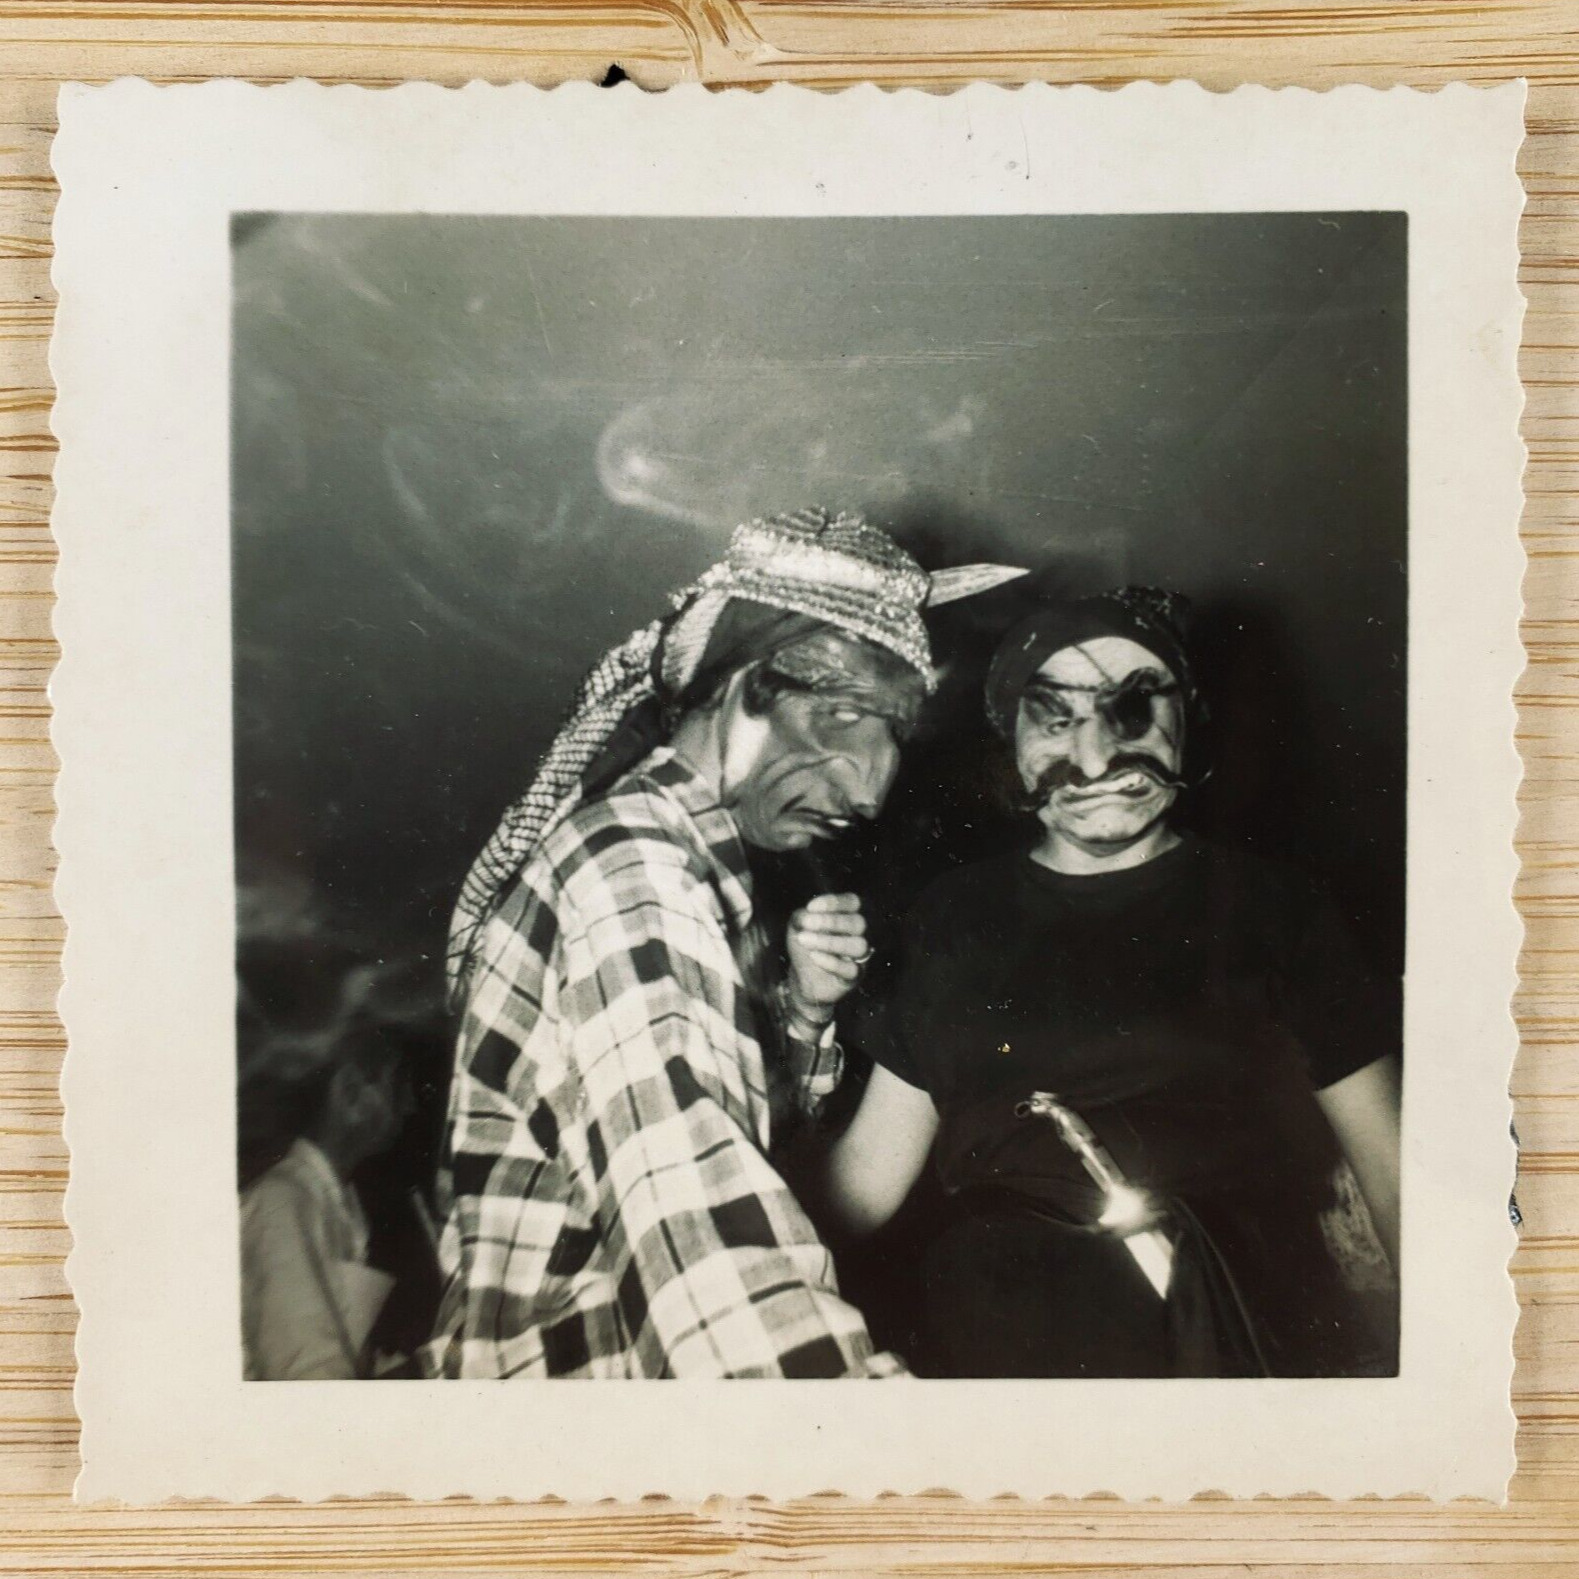 Smoky Room Masked Pirate Photo 1940s Halloween Party Mask Costume Snapshot C3009